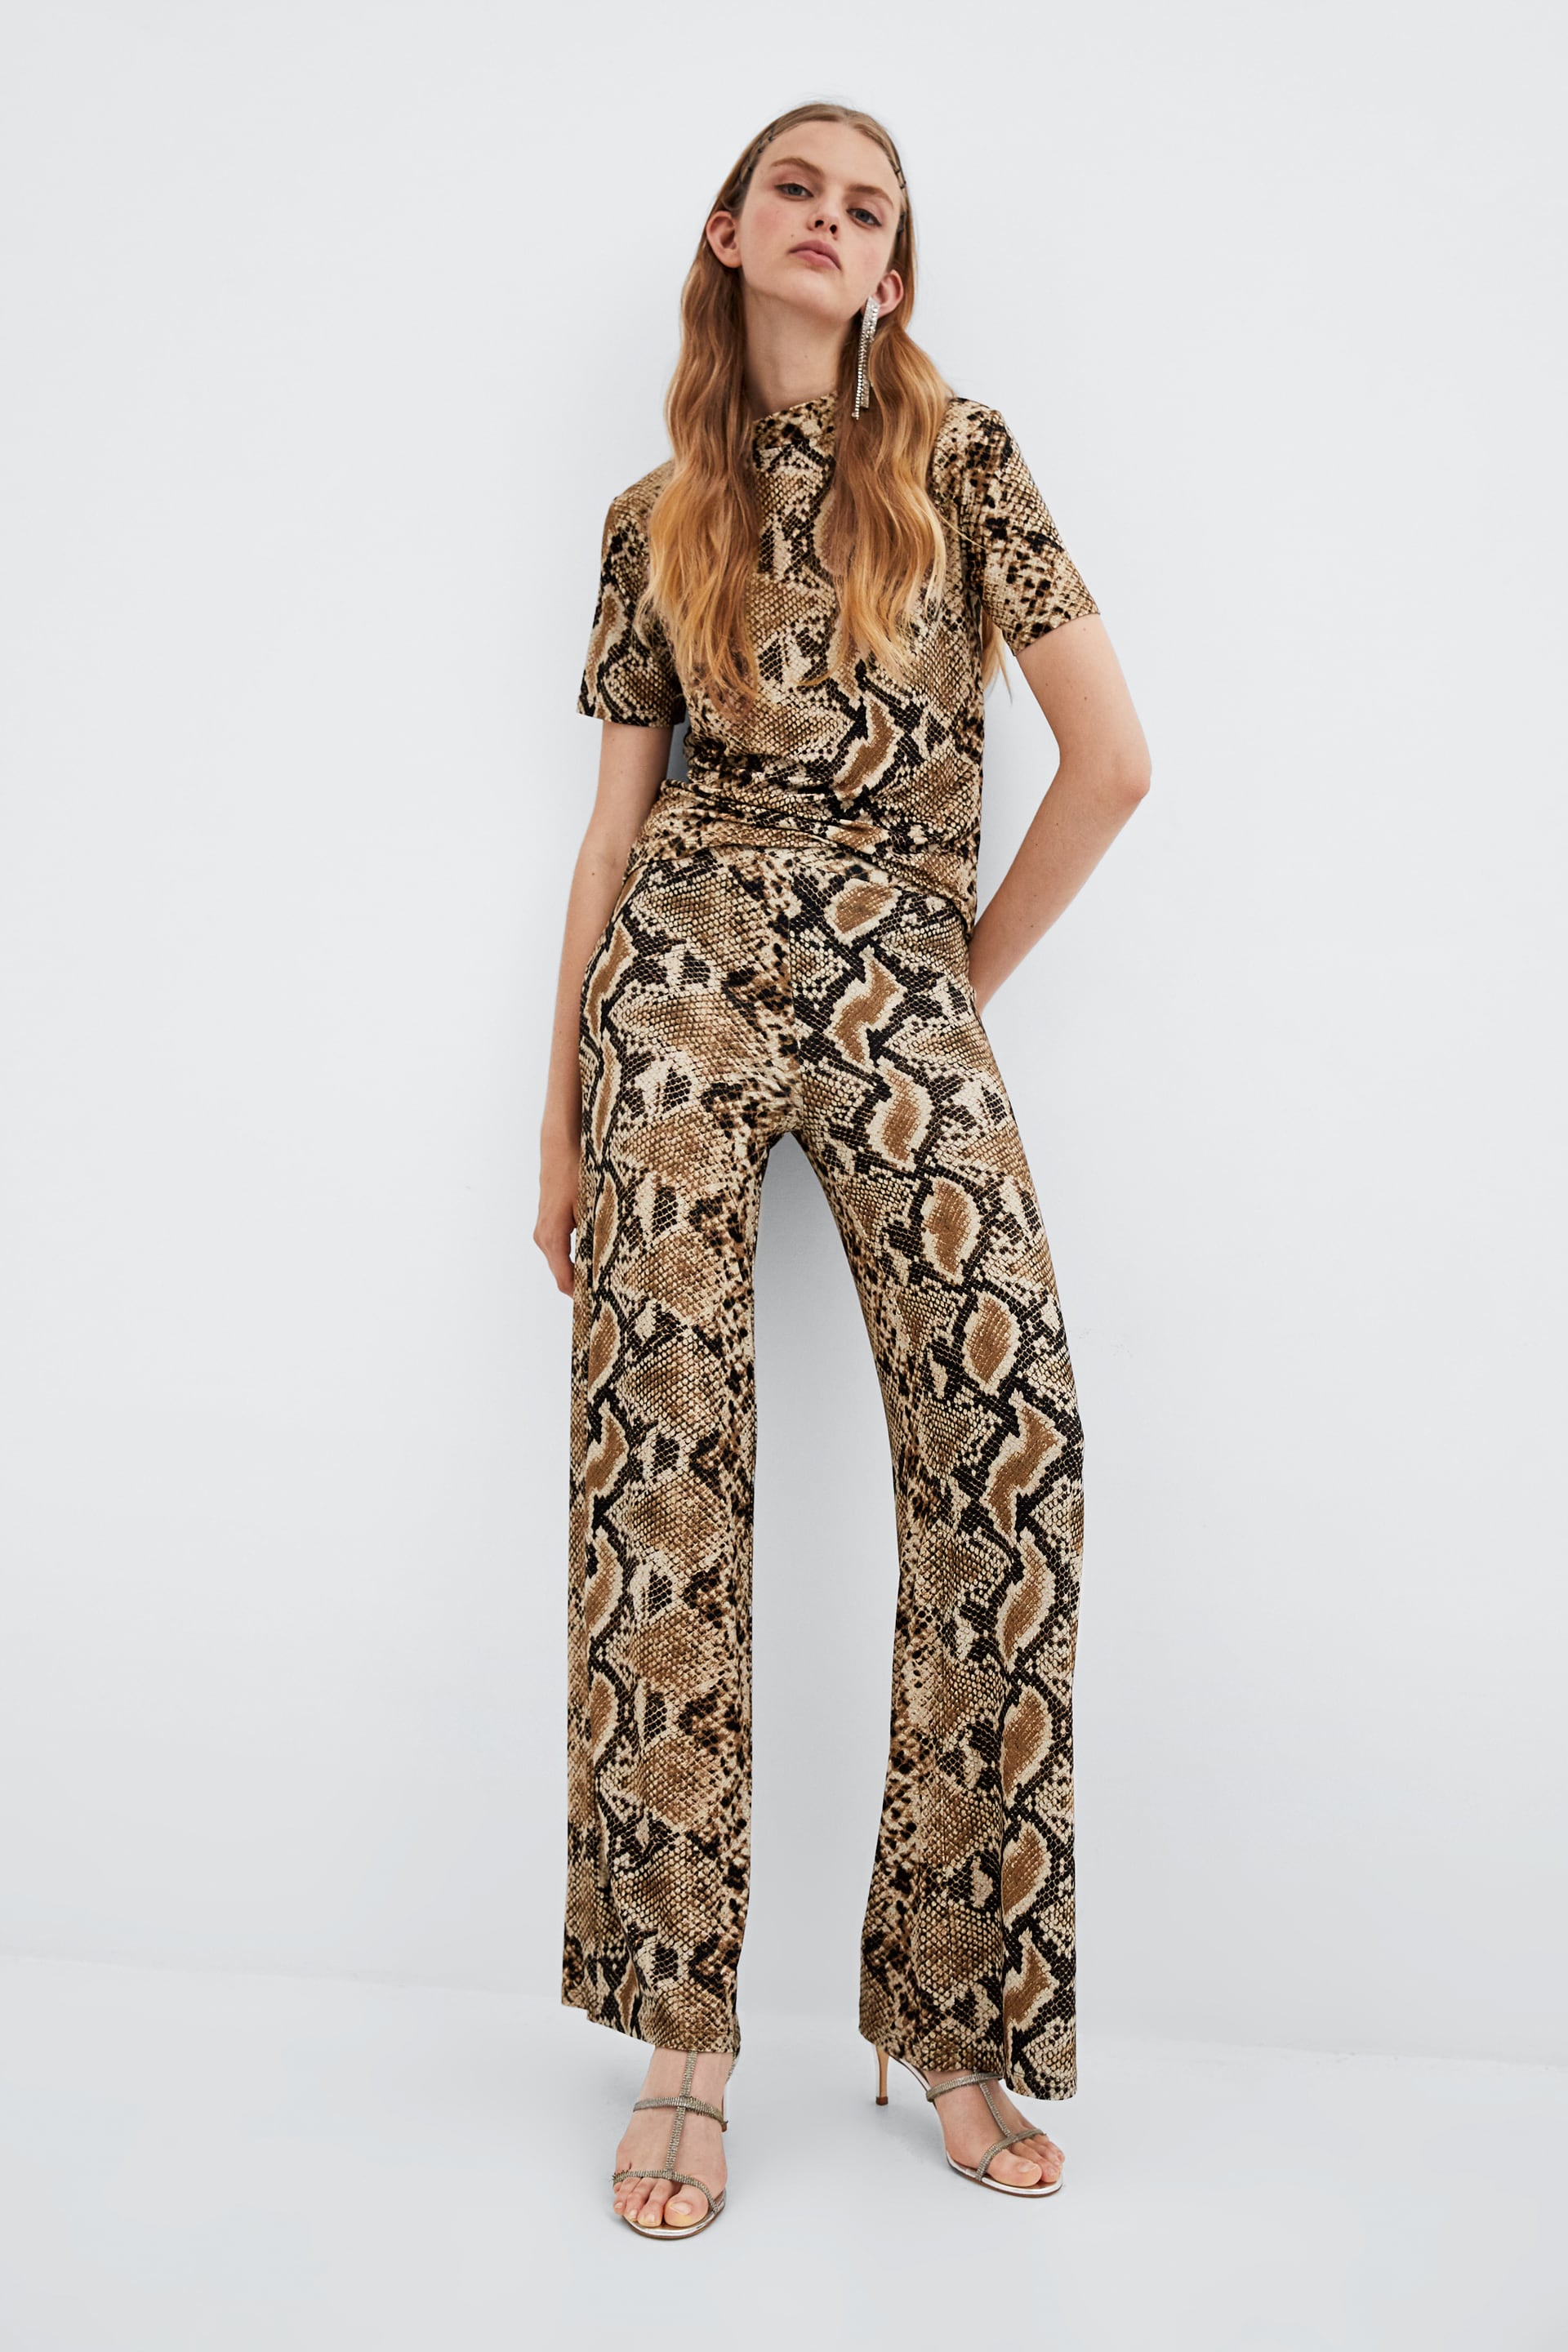 Shop the Snake-Print Trend at Zara | Who What Wear